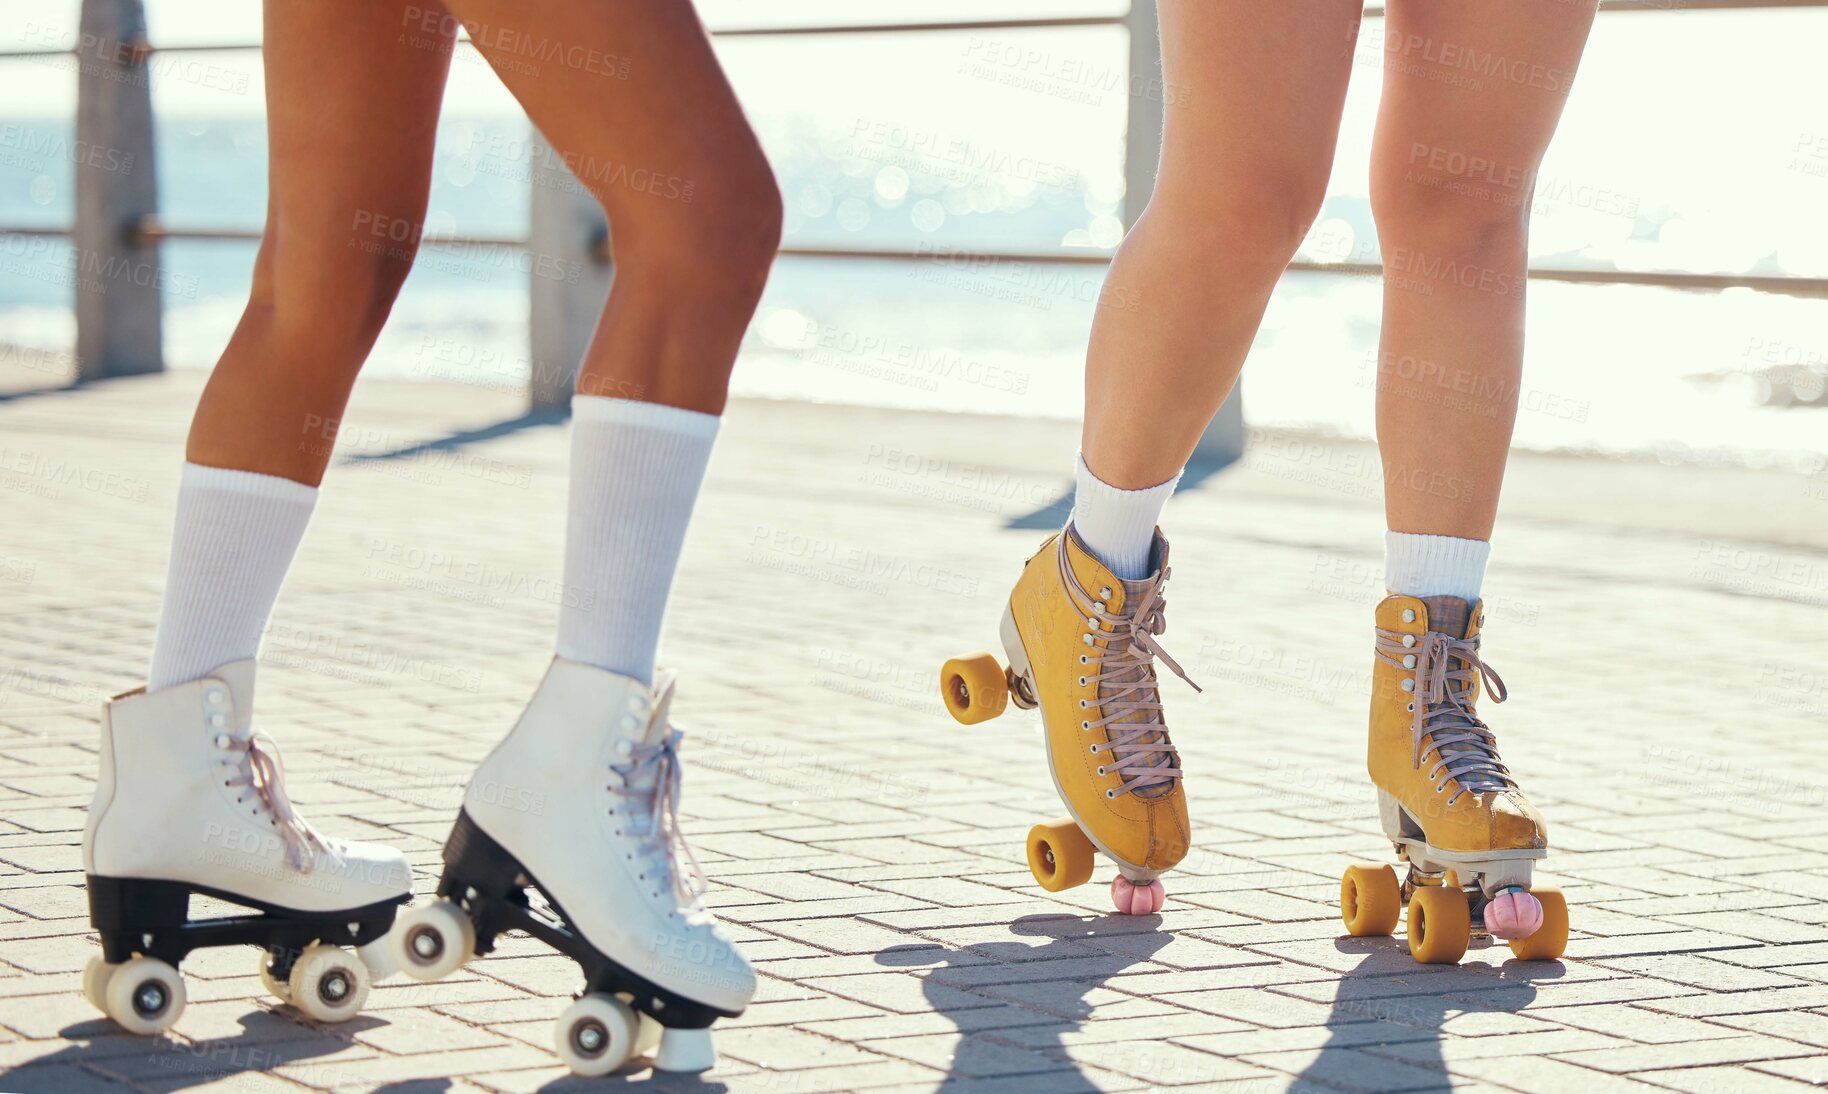 Buy stock photo Roller skates or fun friends on promenade for summer holiday activity or travel outdoor. Cool, trendy or funky women skating legs in quad skating or rollerblades with sunshine, beach and ground